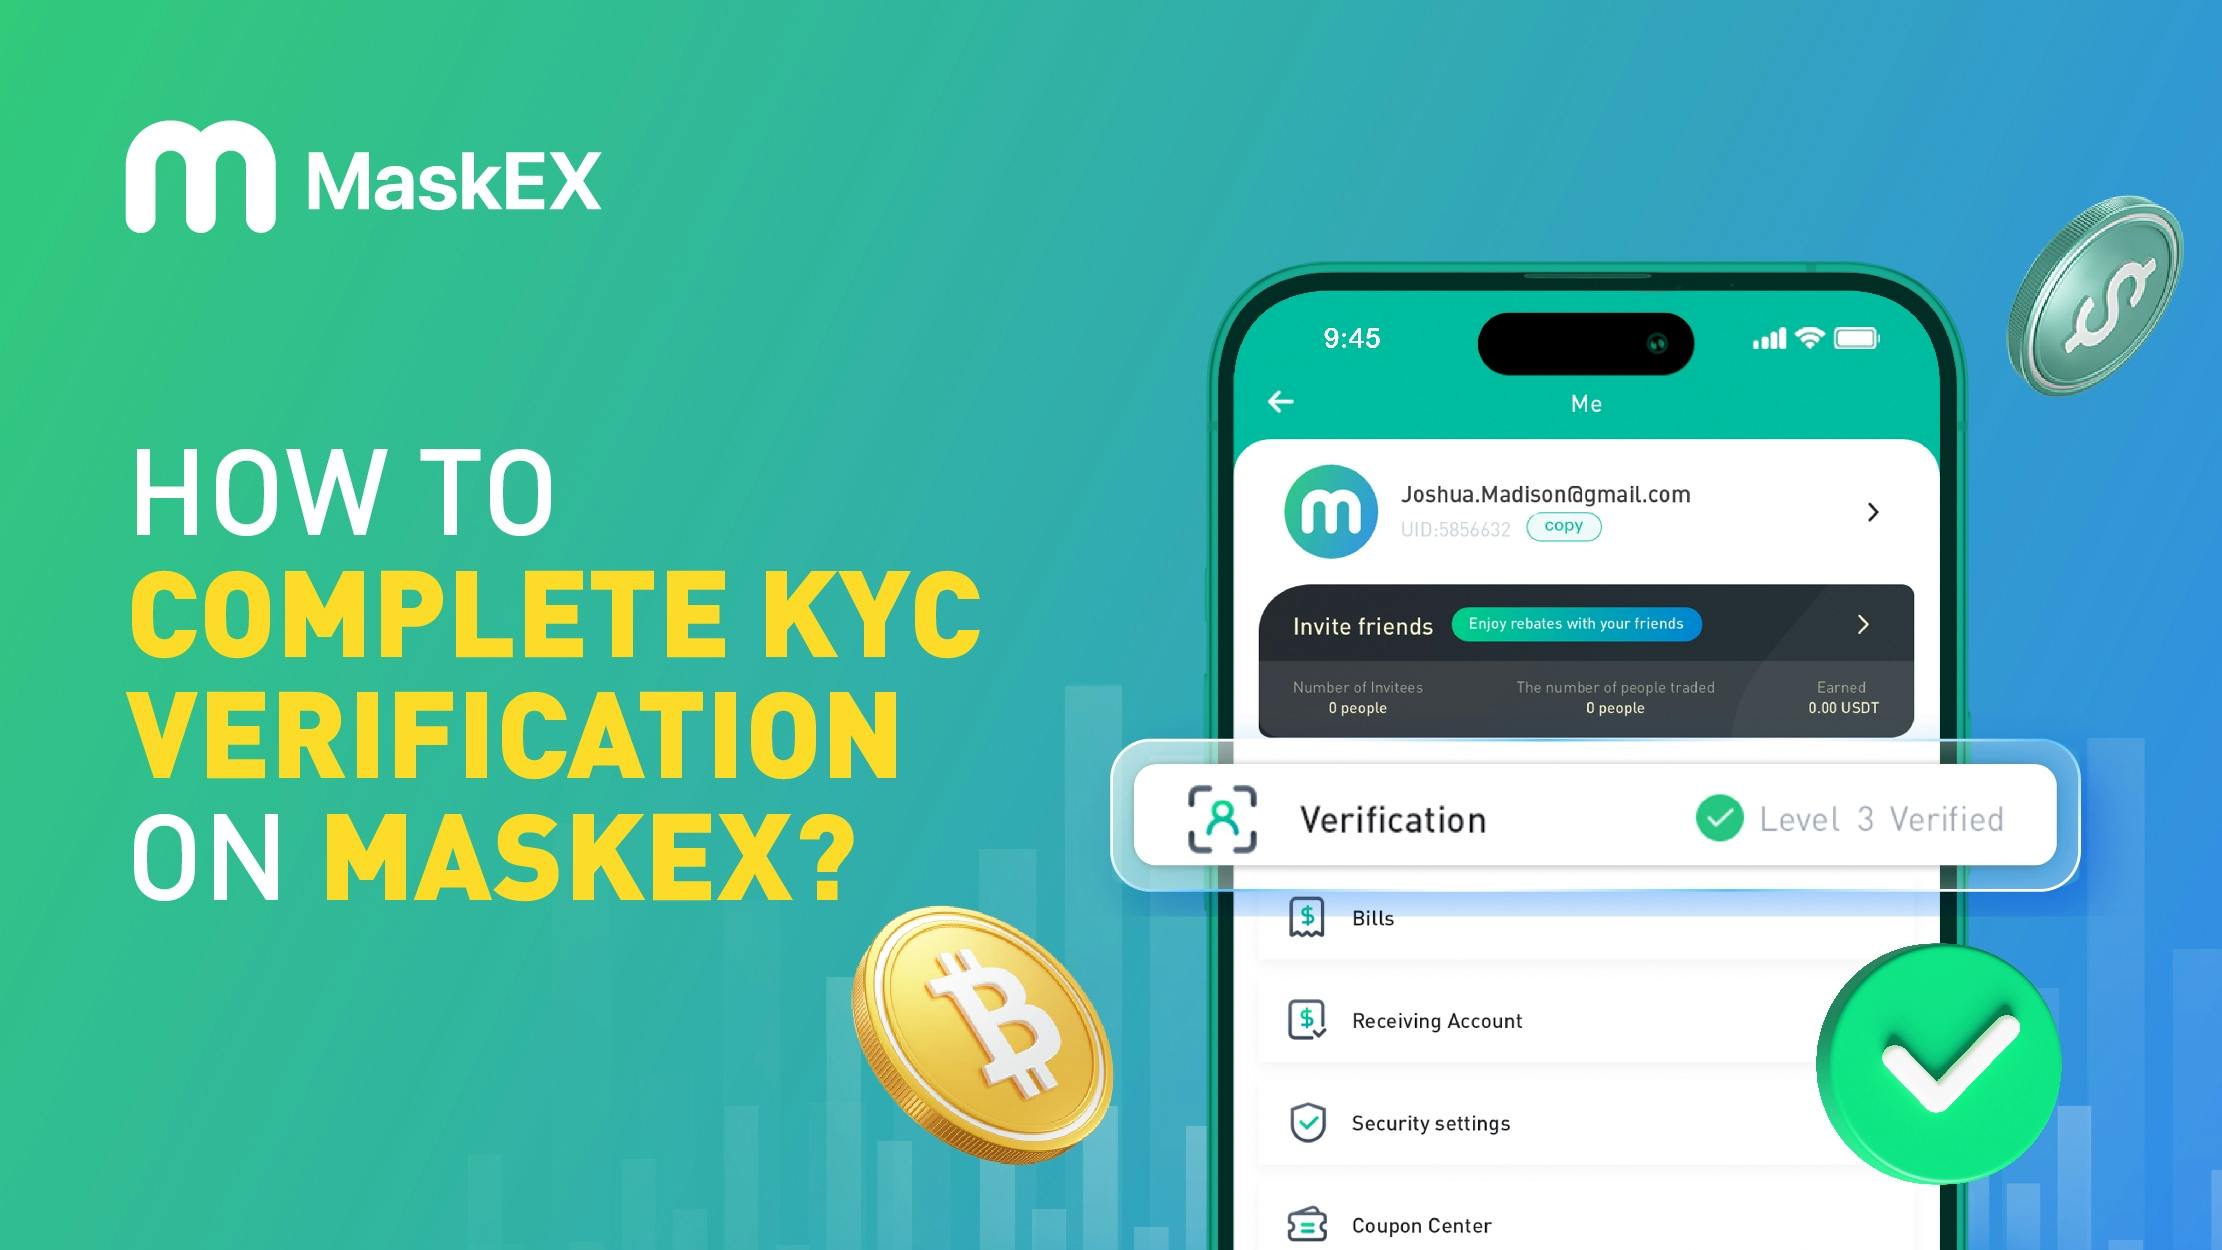 How to Complete KYC Verification on MaskEX?